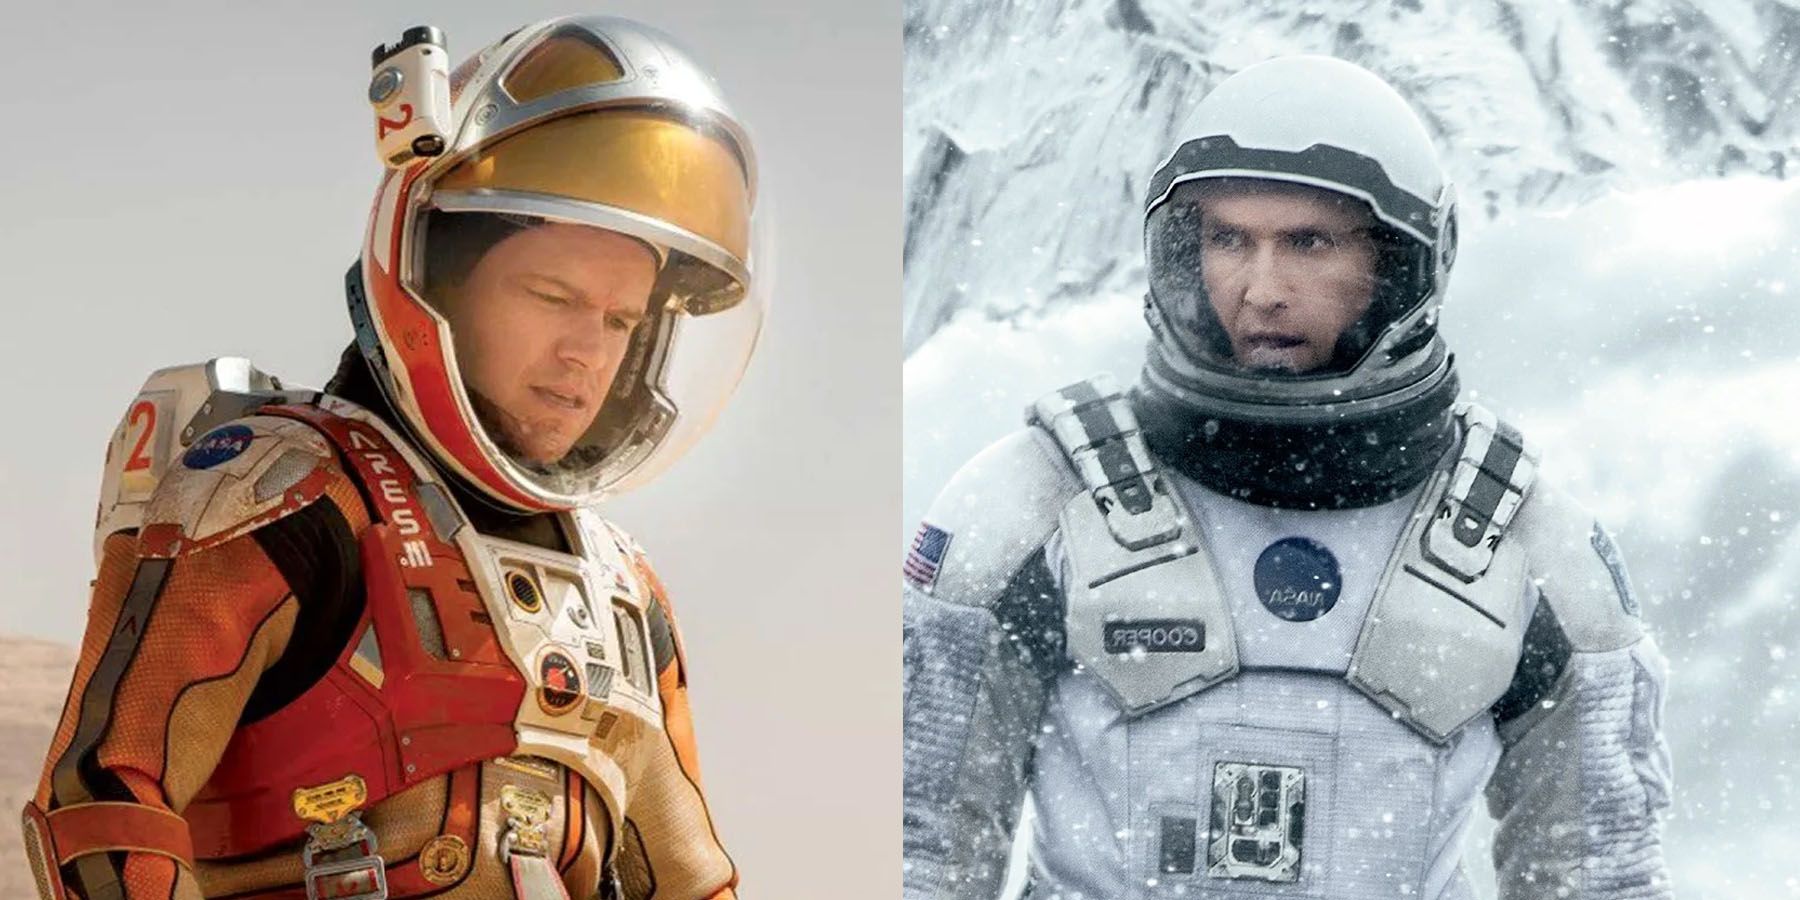 Interstellar and the Martian